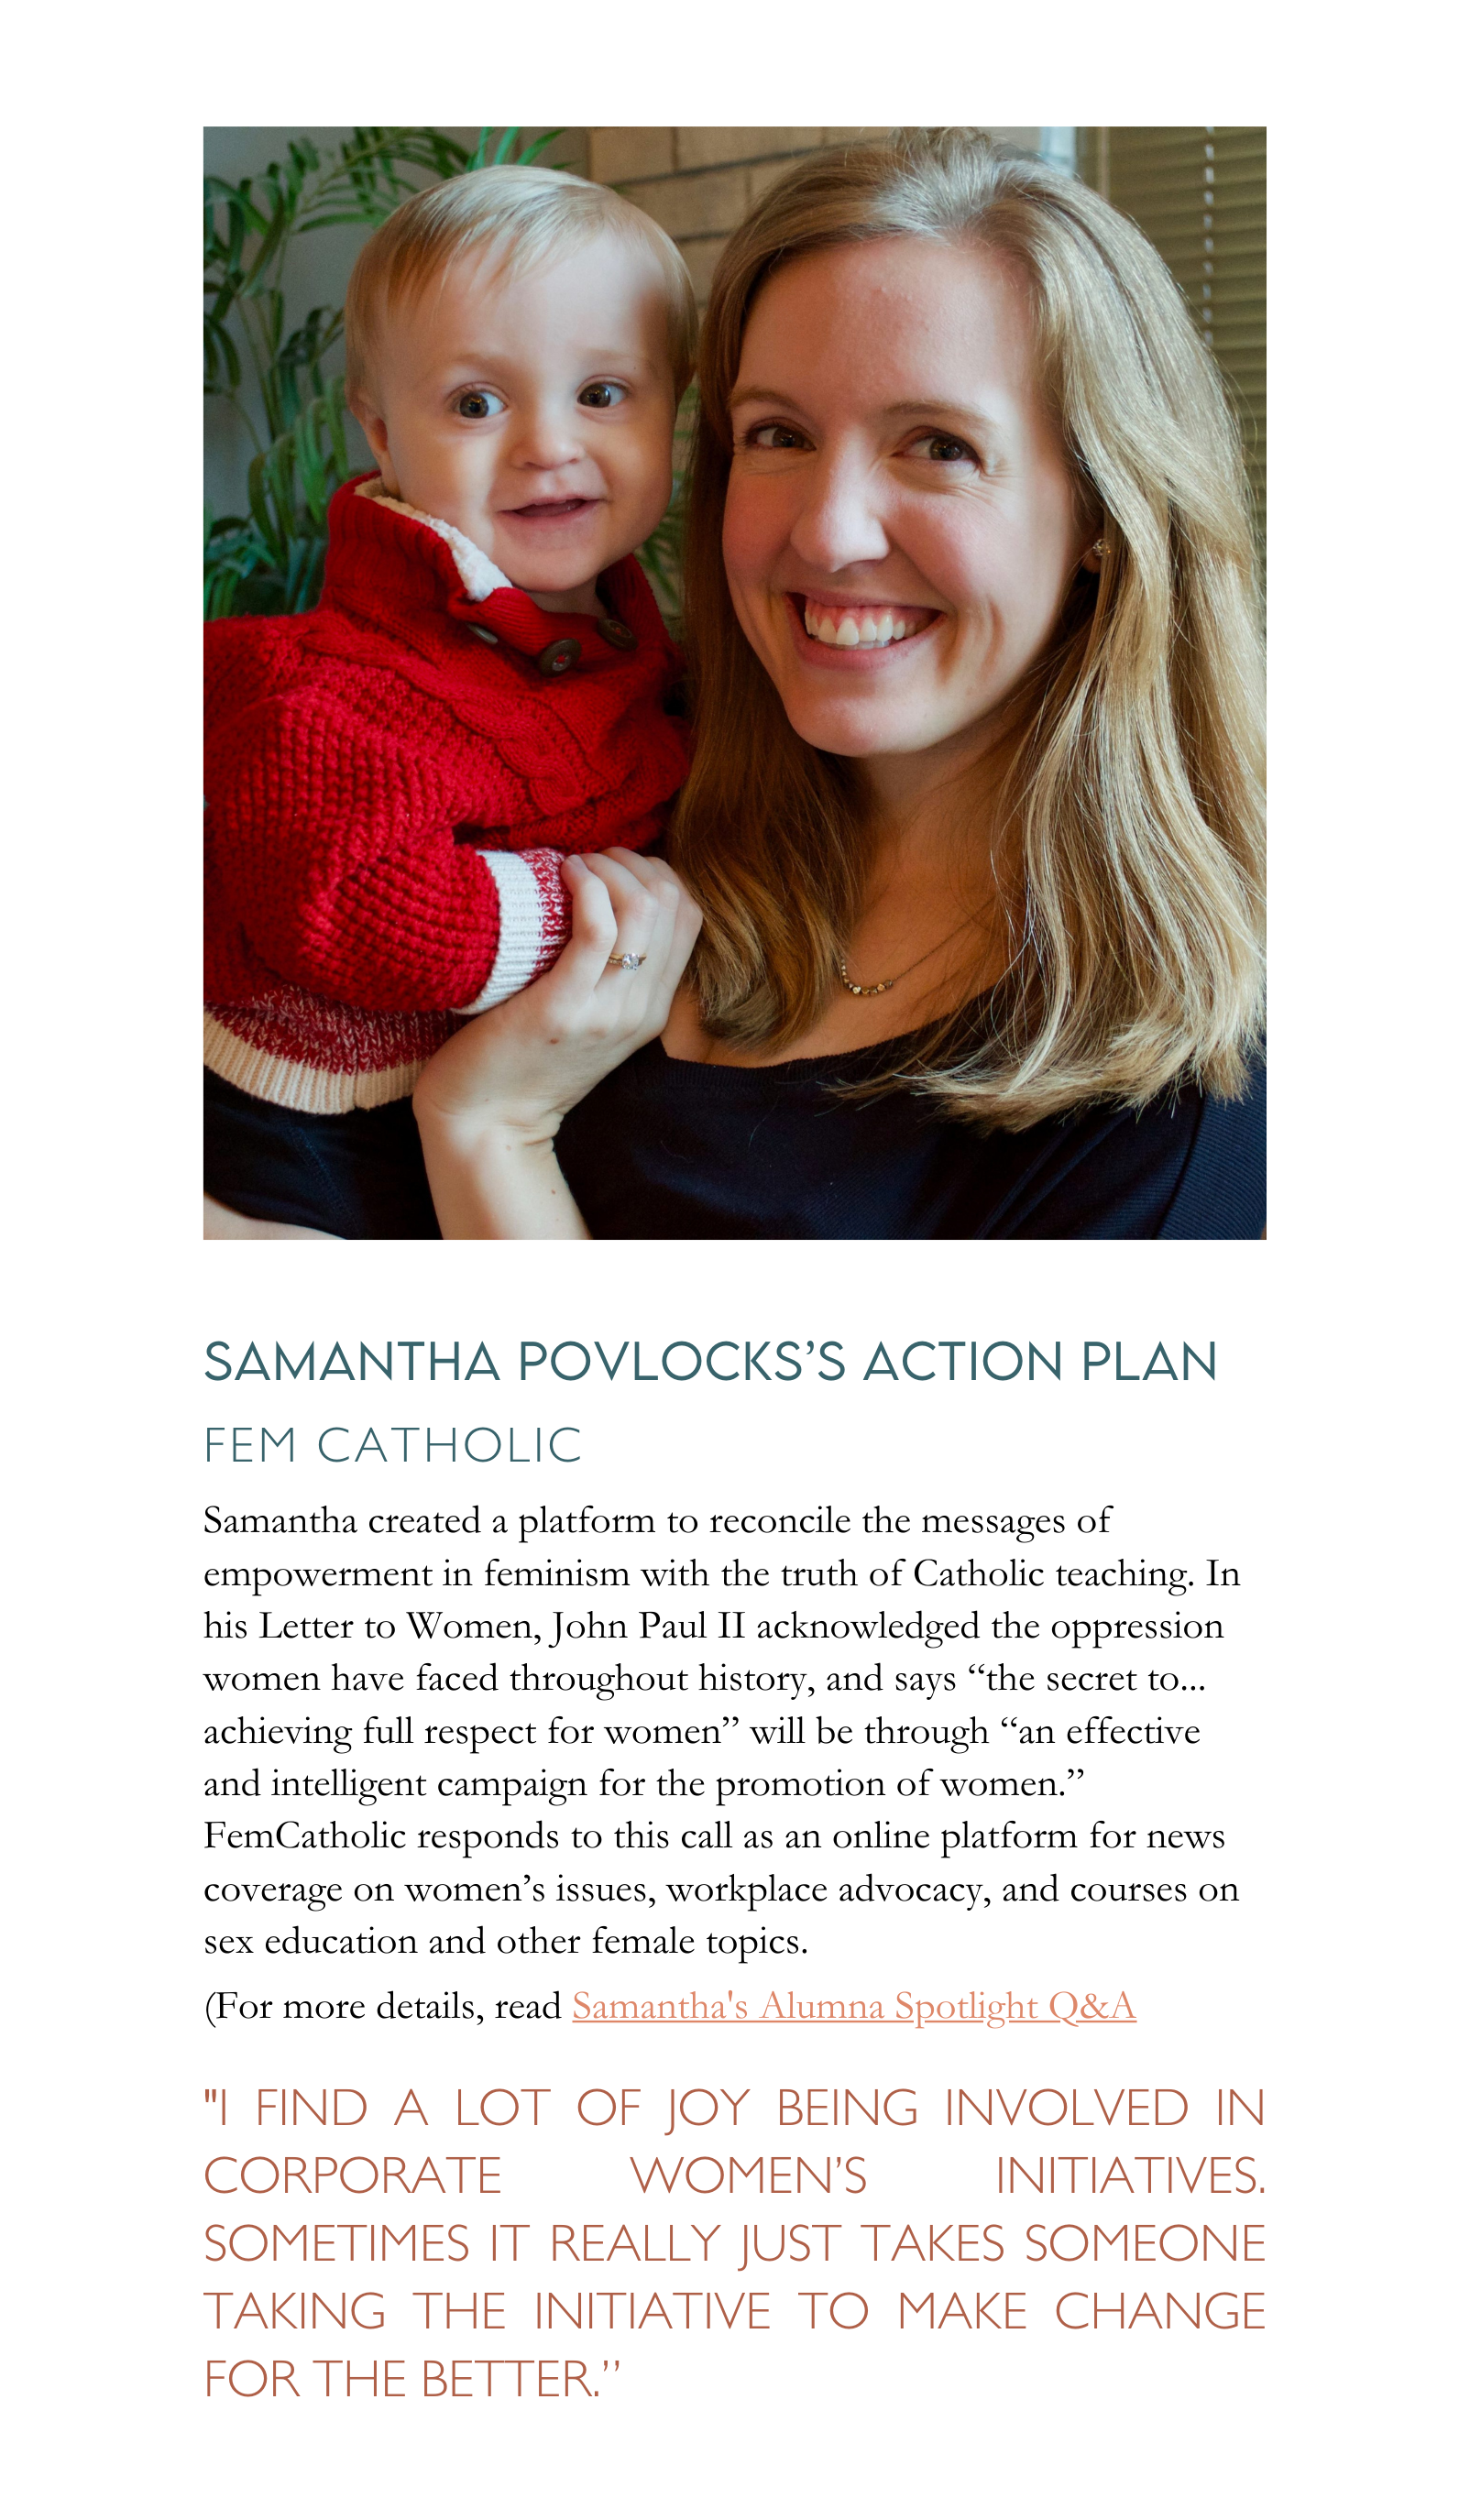 Samantha created a platform to reconcile the messages of empowerment in feminism with the truth of Catholic teaching. In his Letter to Women, John Paul II acknowledged the oppression women have faced throughout history, and says “the secret to... achieving full respect for women” will be through “an effective and intelligent campaign for the promotion of women.” FemCatholic responds to this call as an online platform for news coverage on women’s issues, workplace advocacy, and courses on sex education and other female topics.